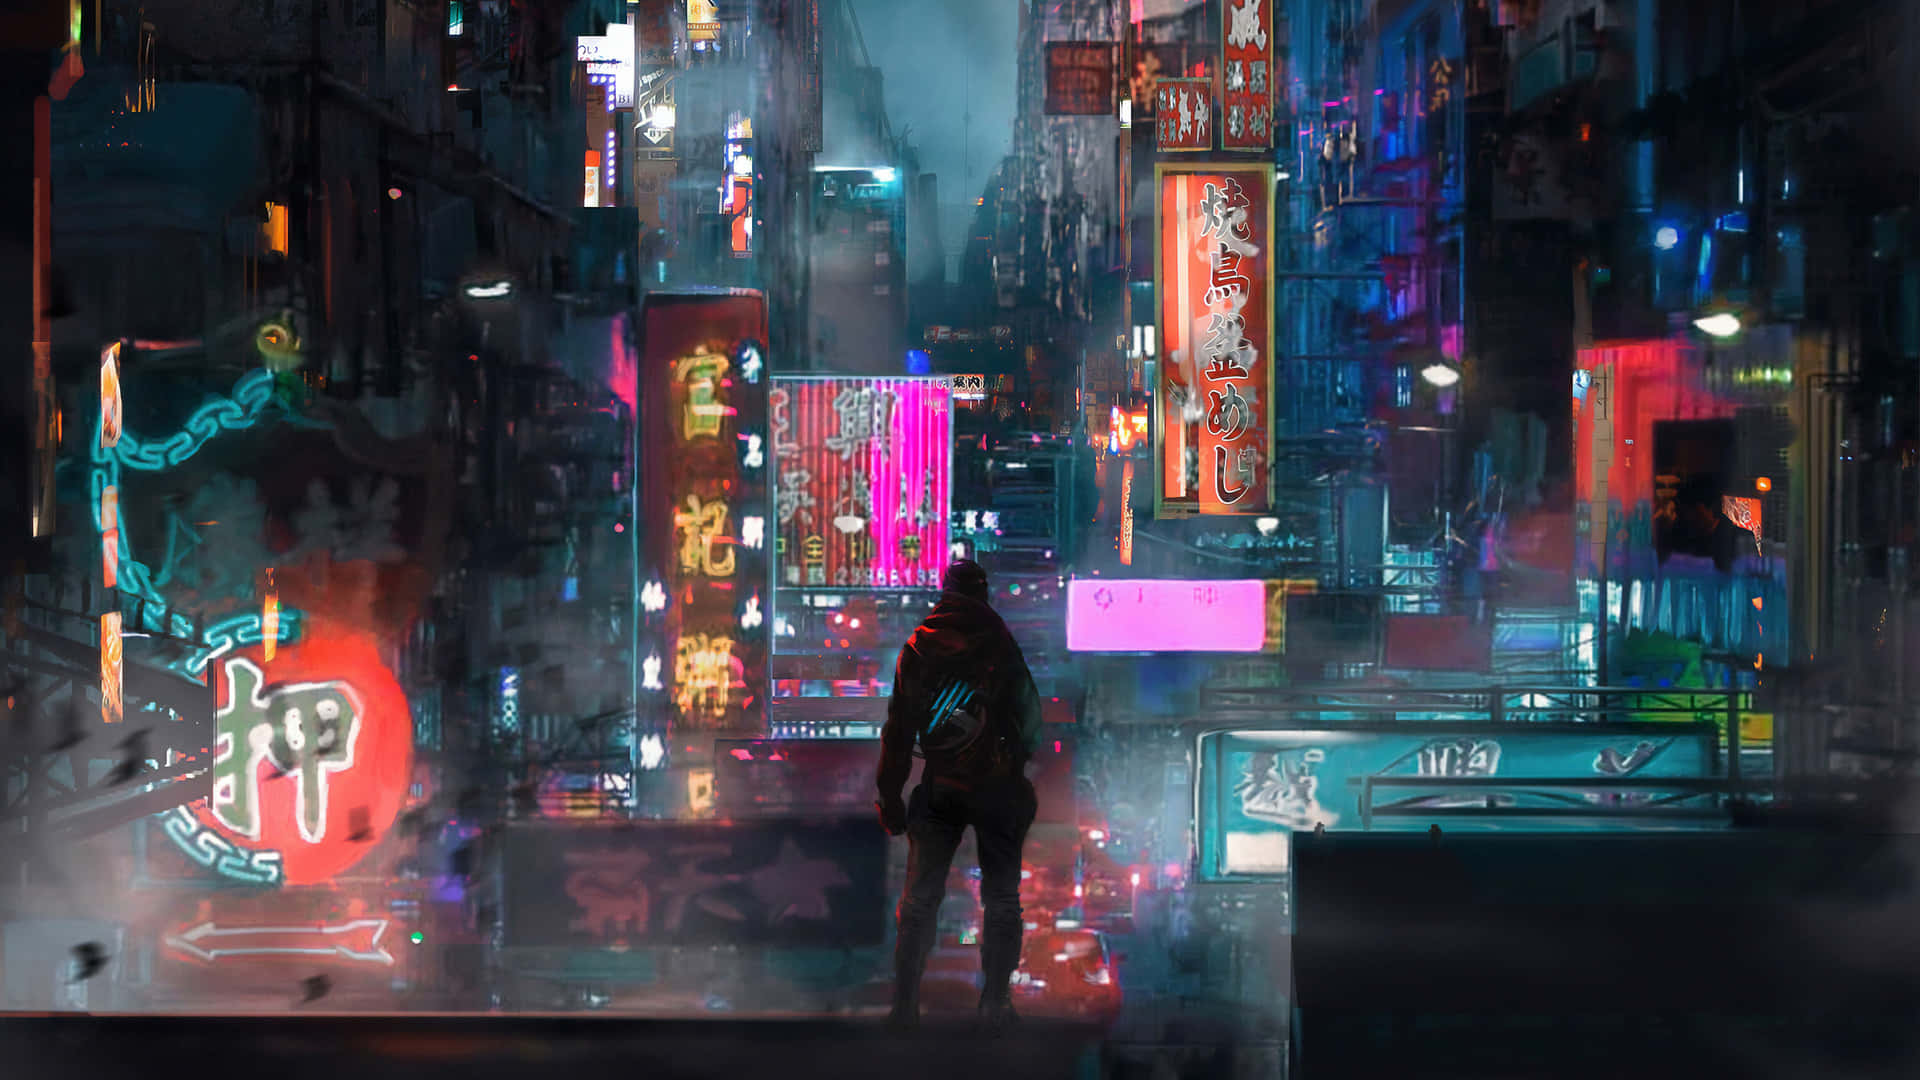 A Stunning View Of A Cyberpunk Inspired Cityscape At Night